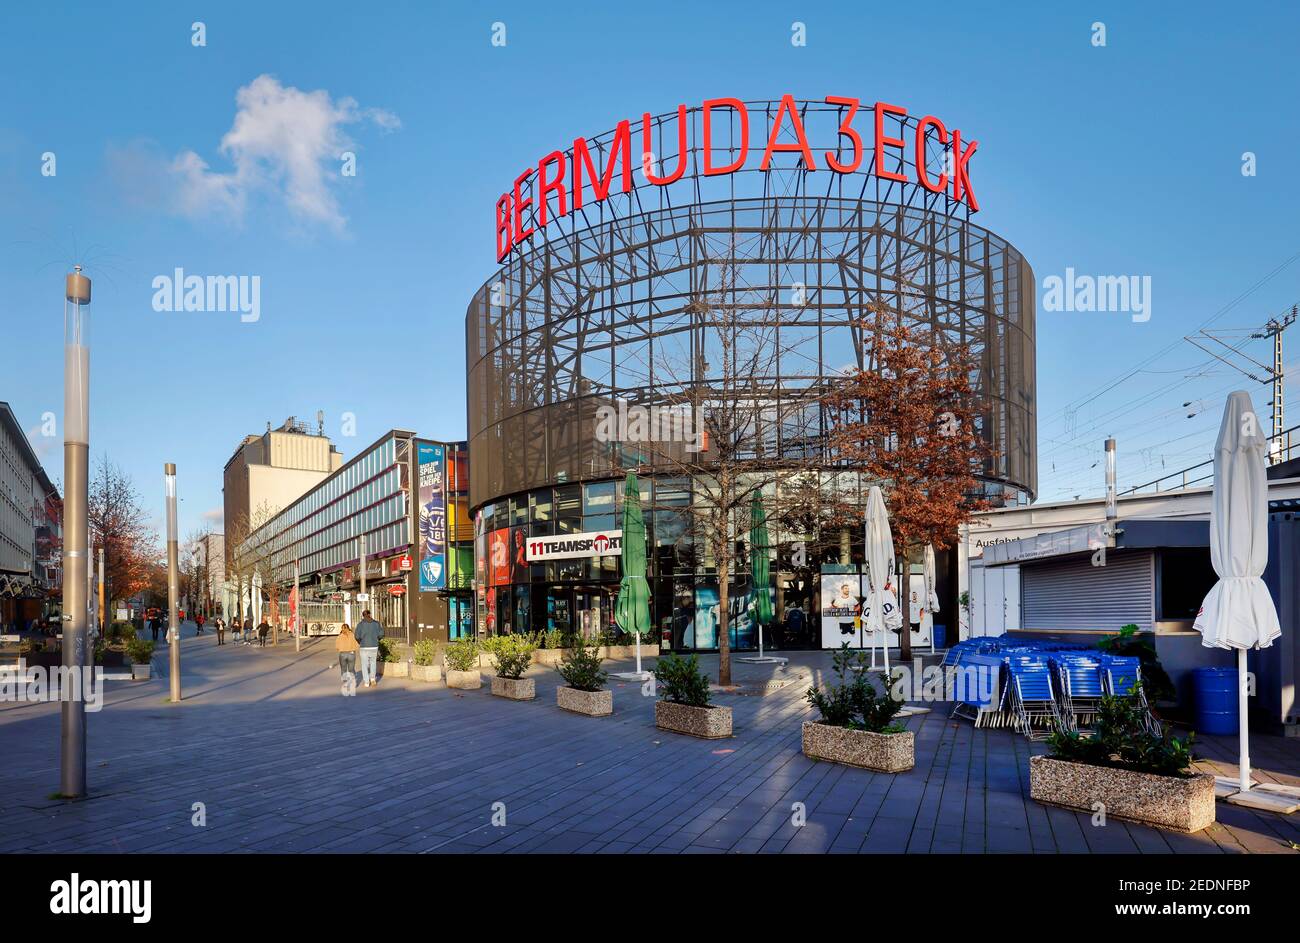 20.11.2020, Bochum, North Rhine-Westphalia, Germany - Deserted Bermuda Triangle nightlife area in Bochum city centre during the second part of the Cor Stock Photo